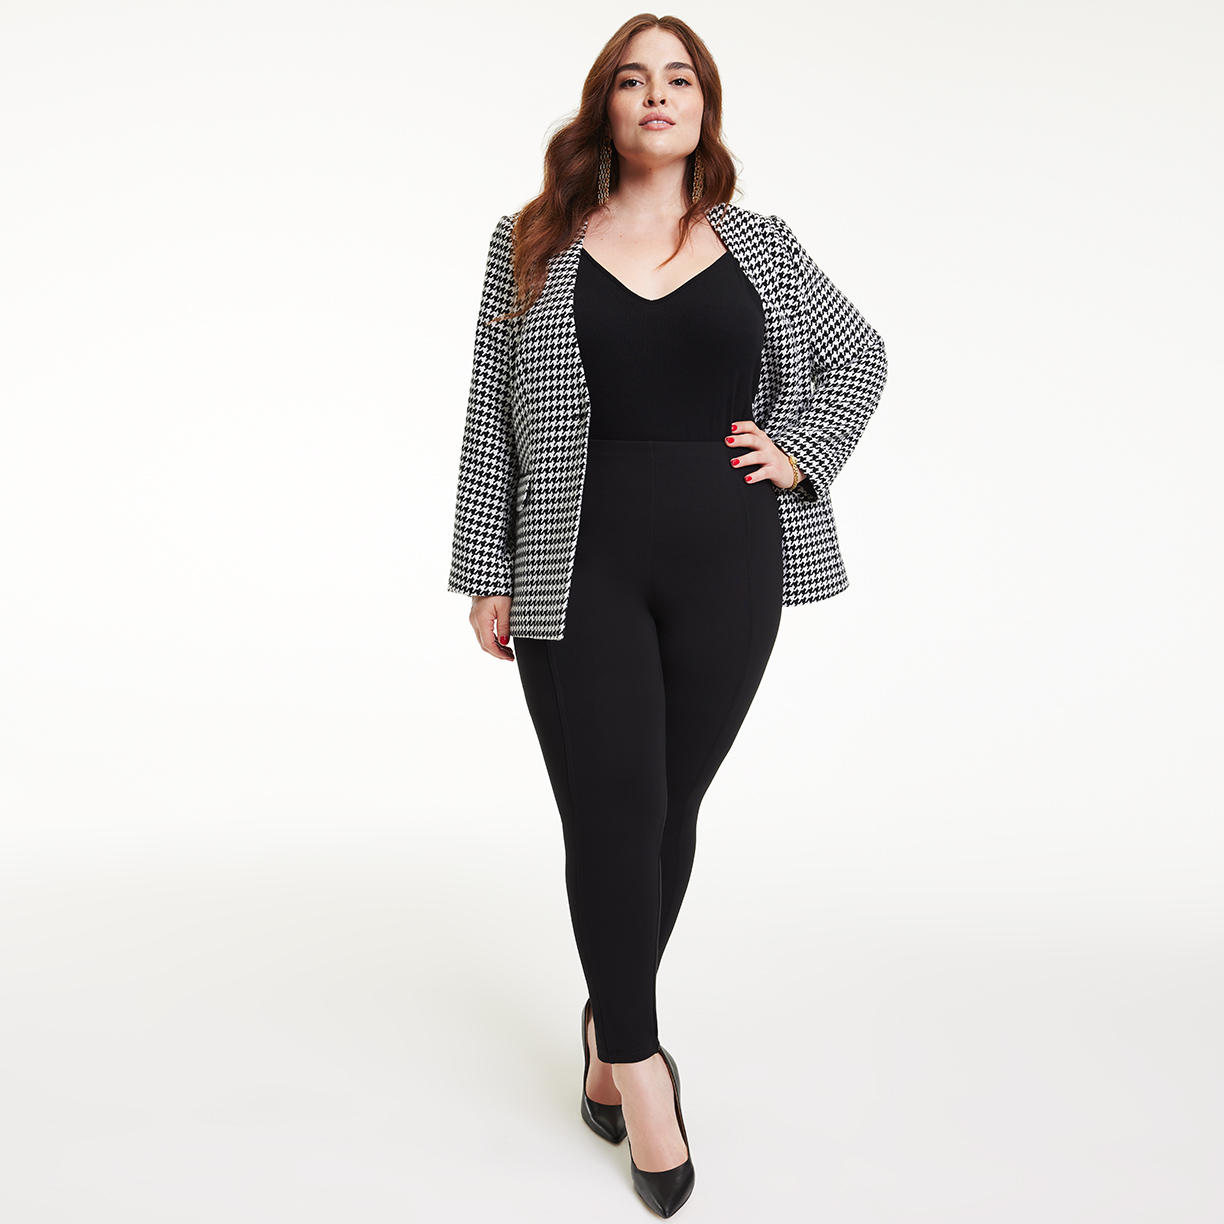 Polished Looks Feat. T Tahari Up to 60% Off  